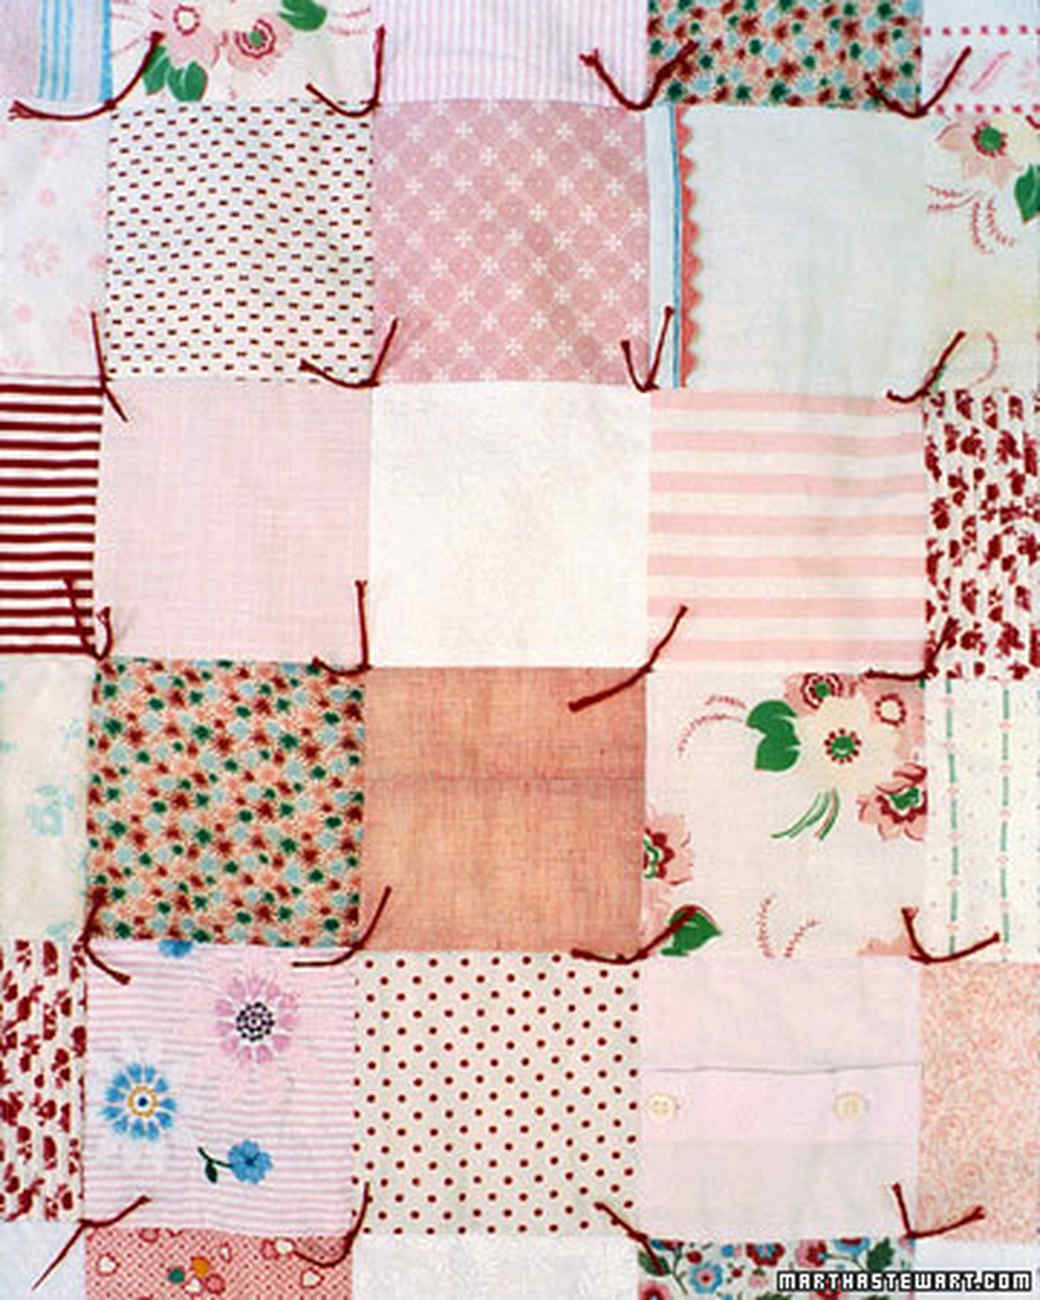 patch quilt baby blankets